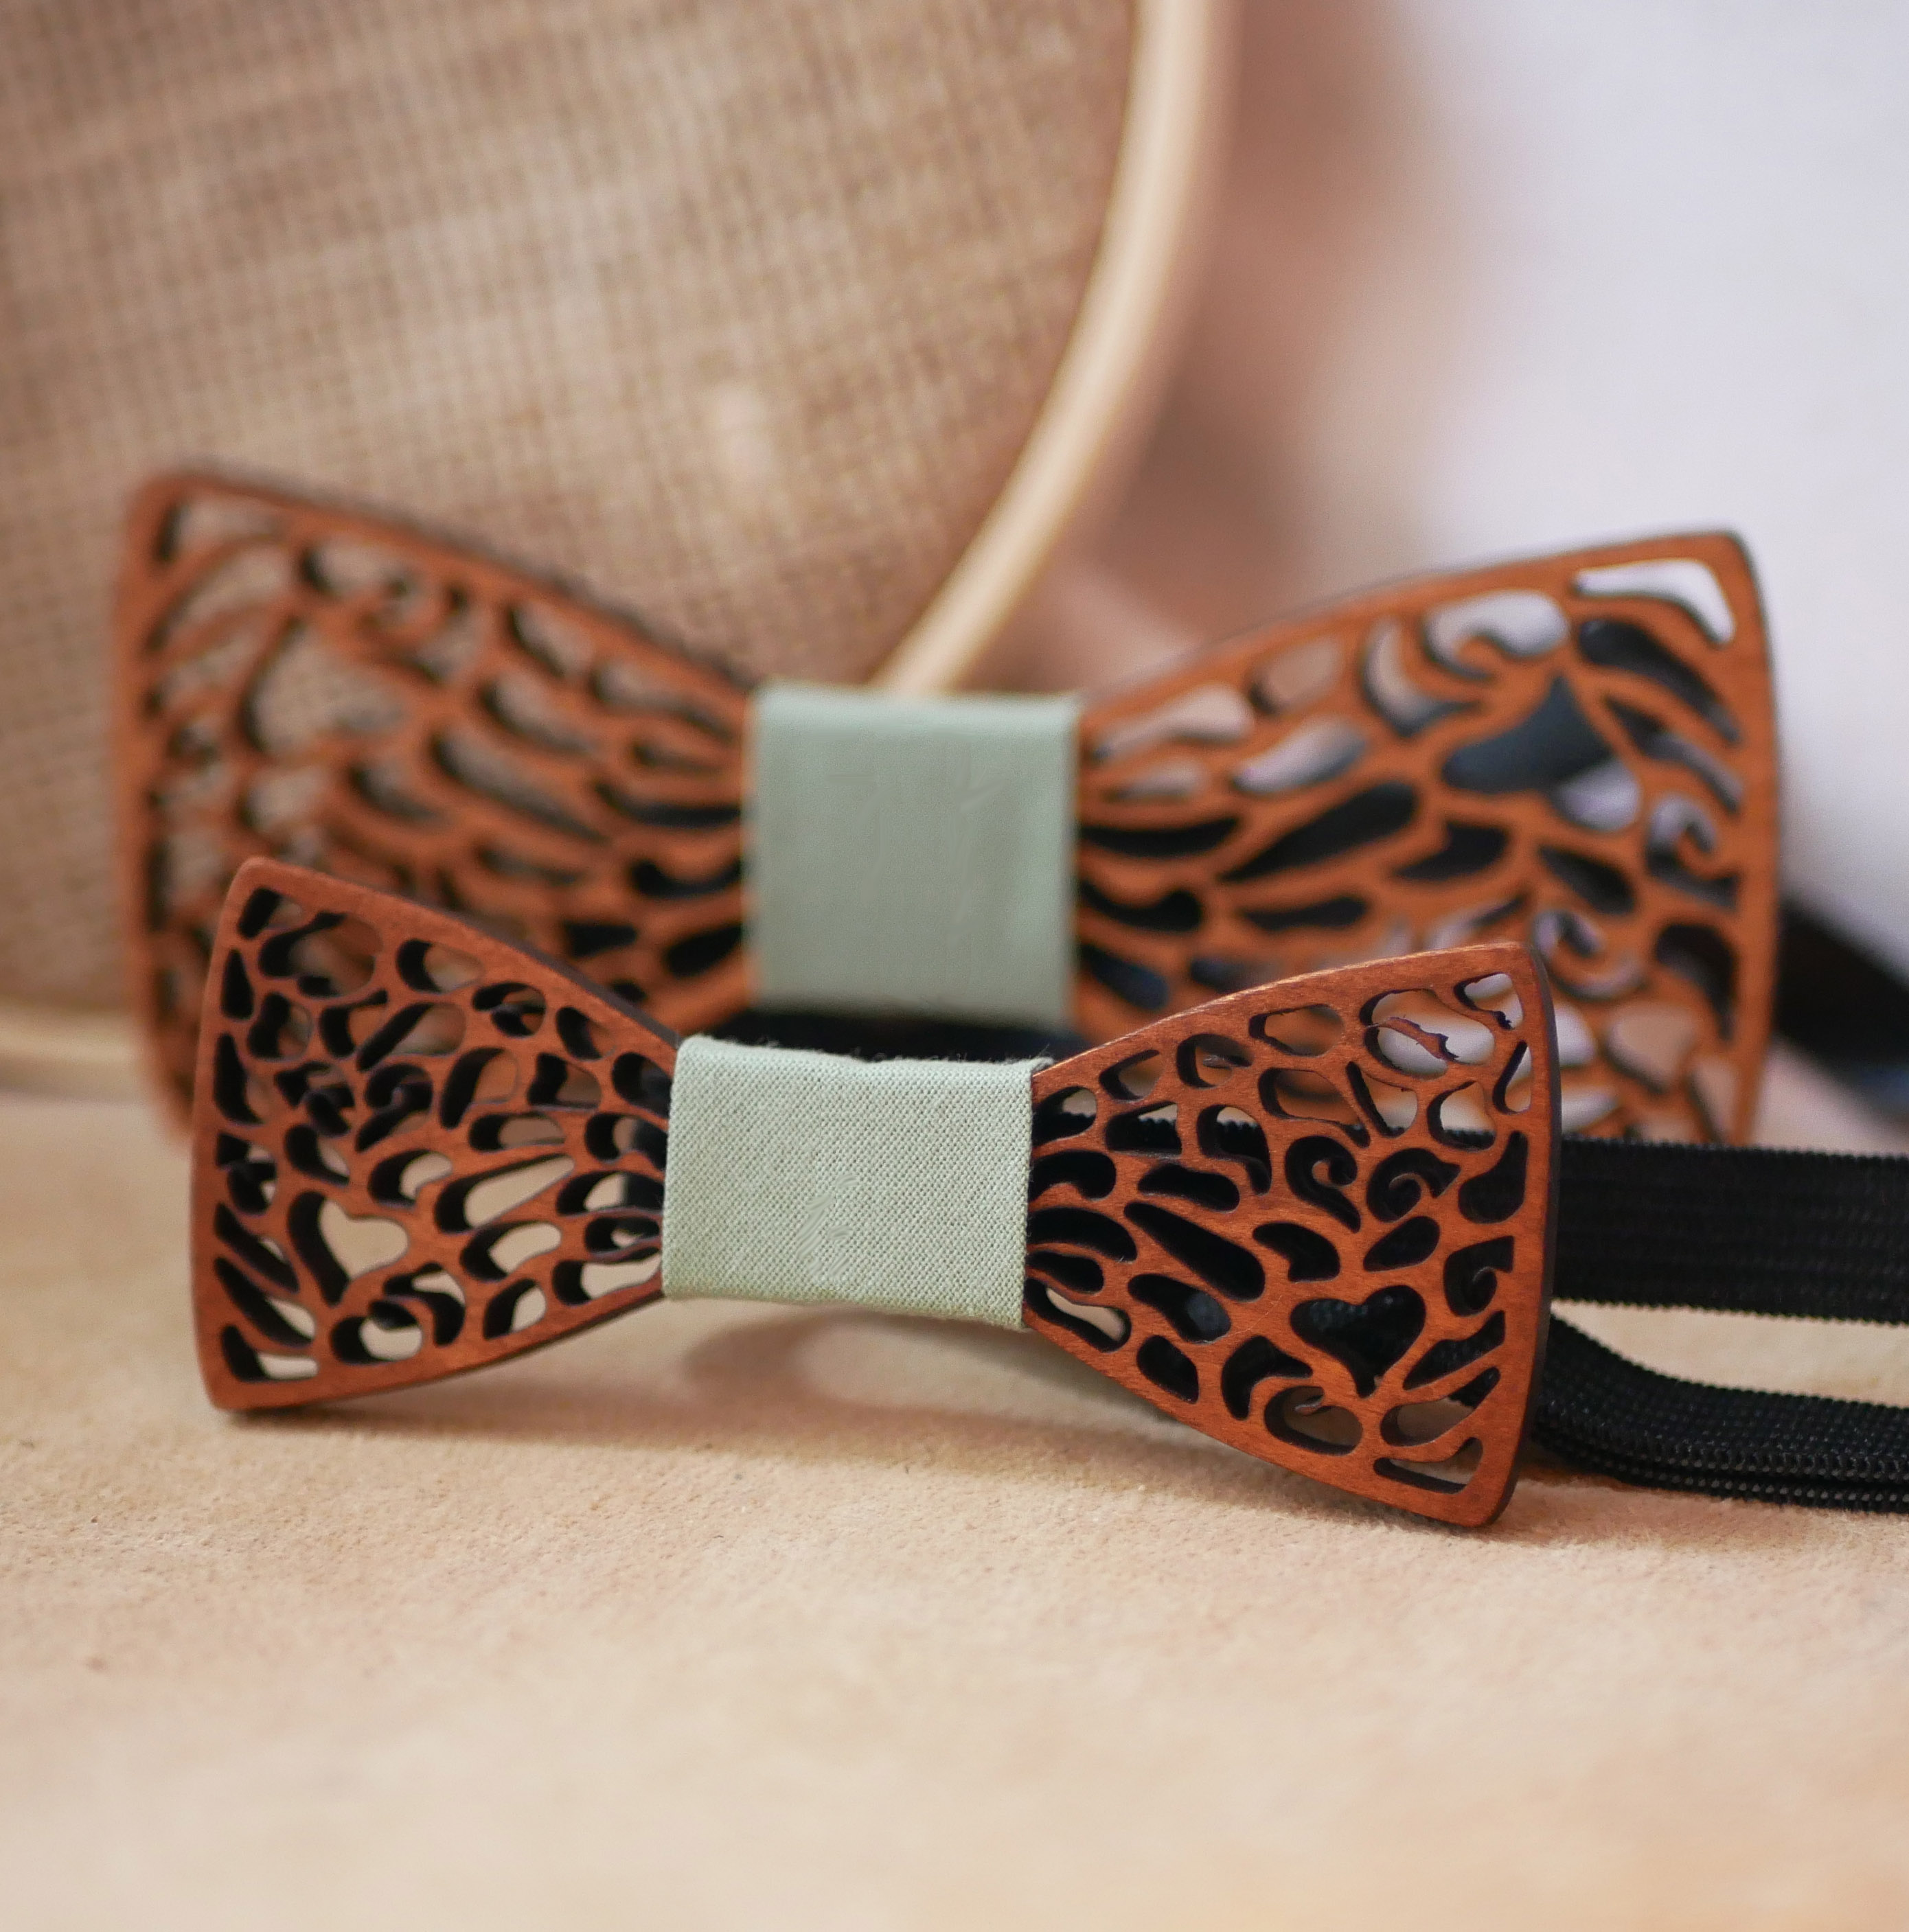 Fine lace wood bow tie with hidden heart